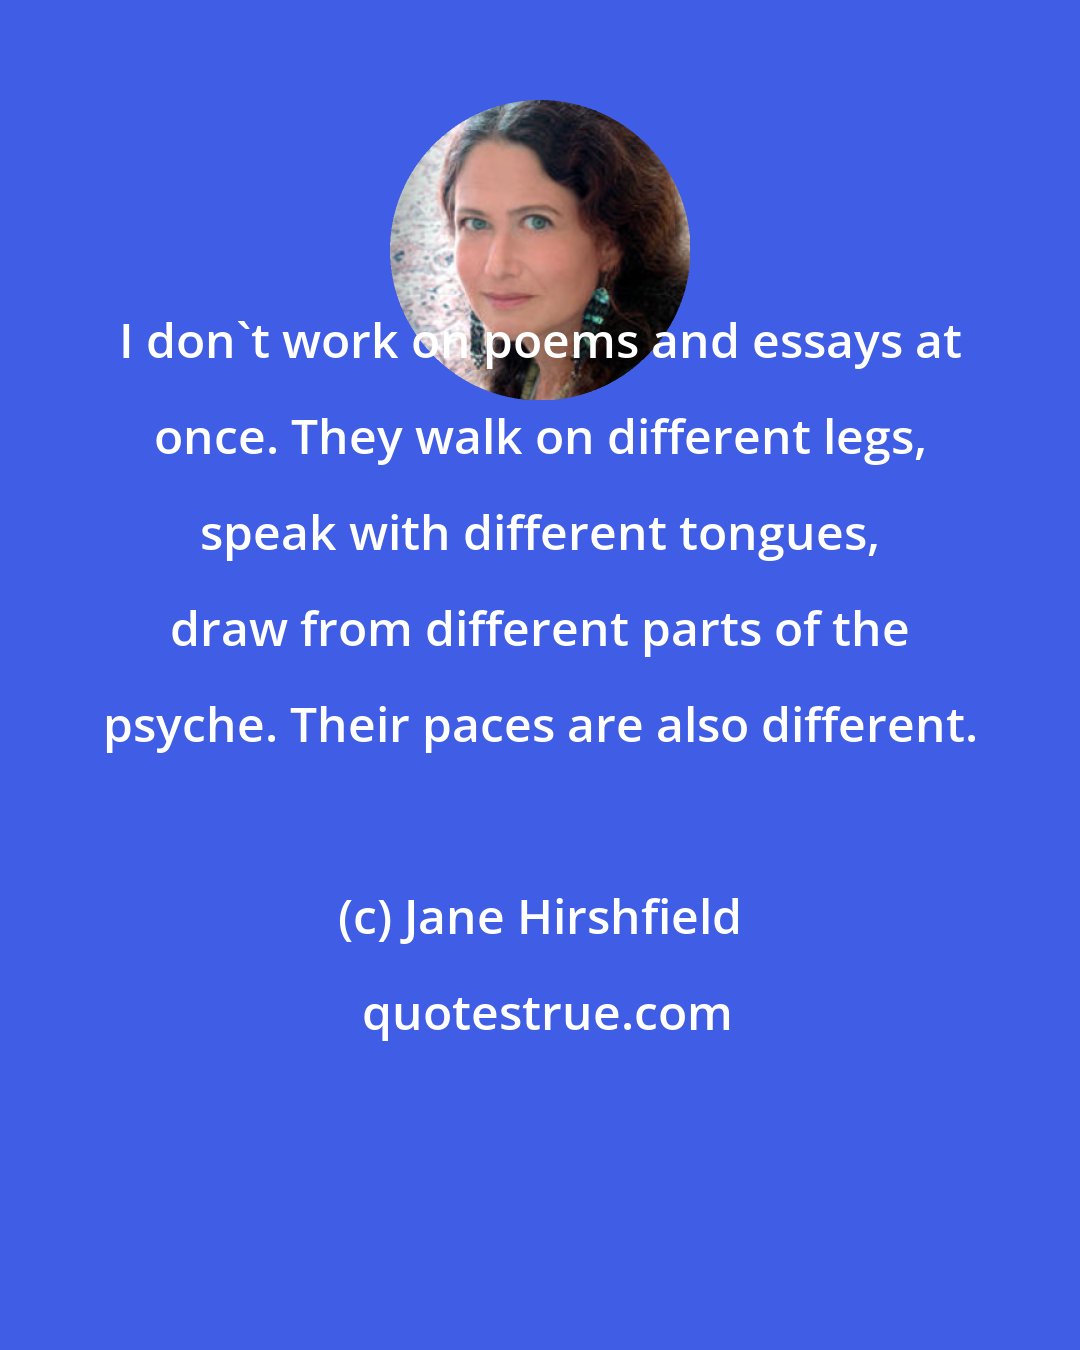 Jane Hirshfield: I don't work on poems and essays at once. They walk on different legs, speak with different tongues, draw from different parts of the psyche. Their paces are also different.